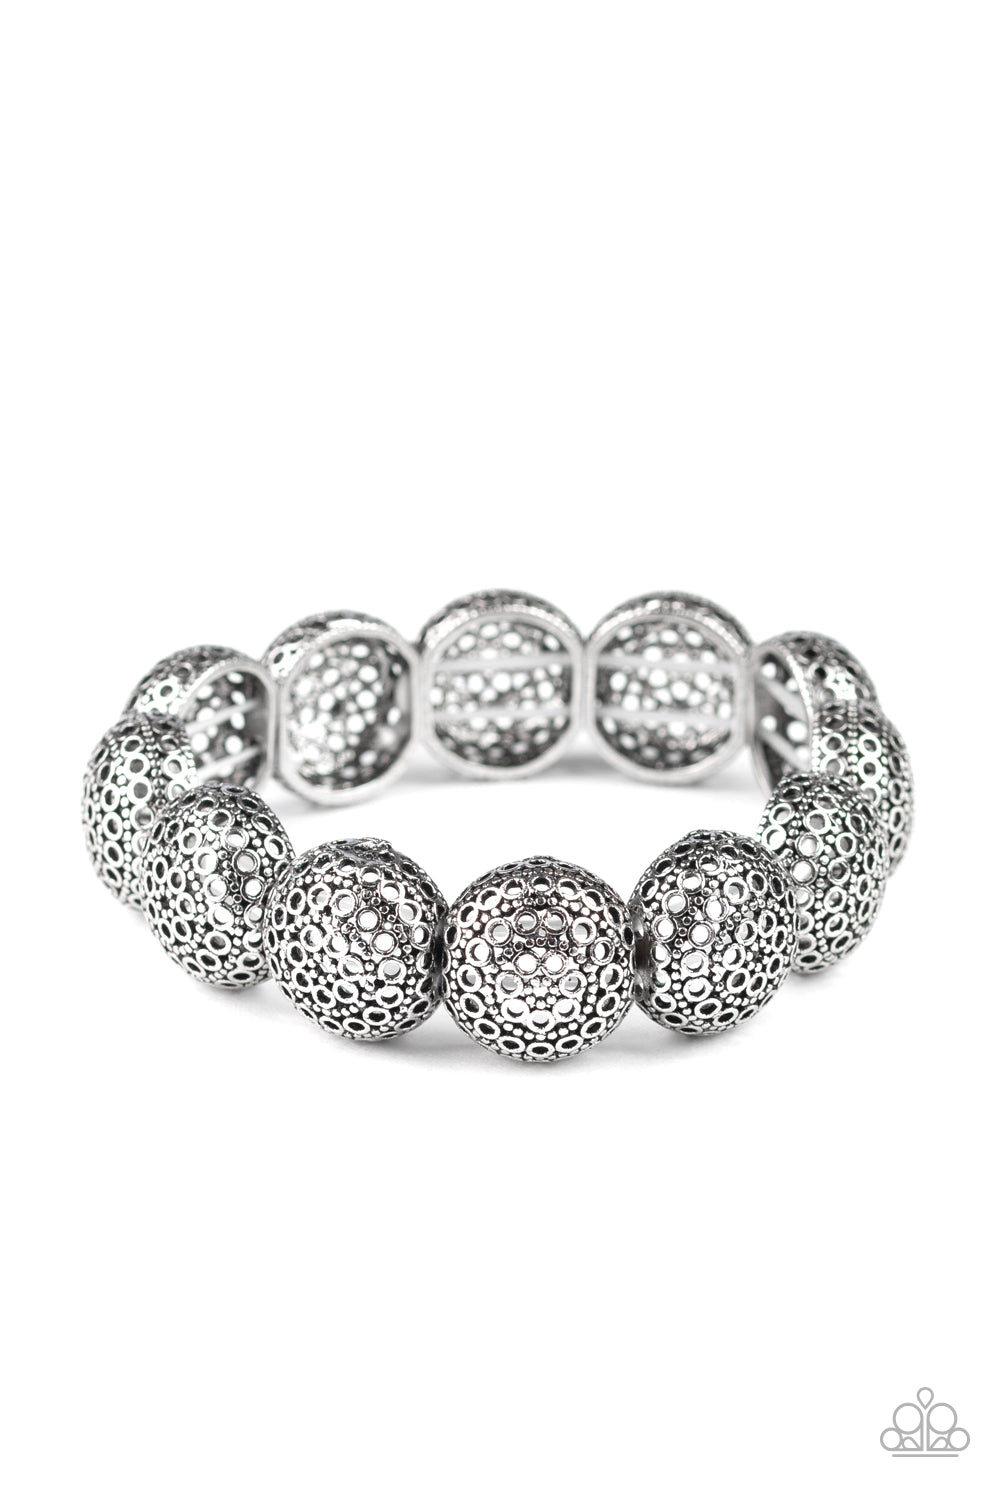 Paparazzi Accessories - Obviously Ornate - Silver Bracelet - Alies Bling Bar